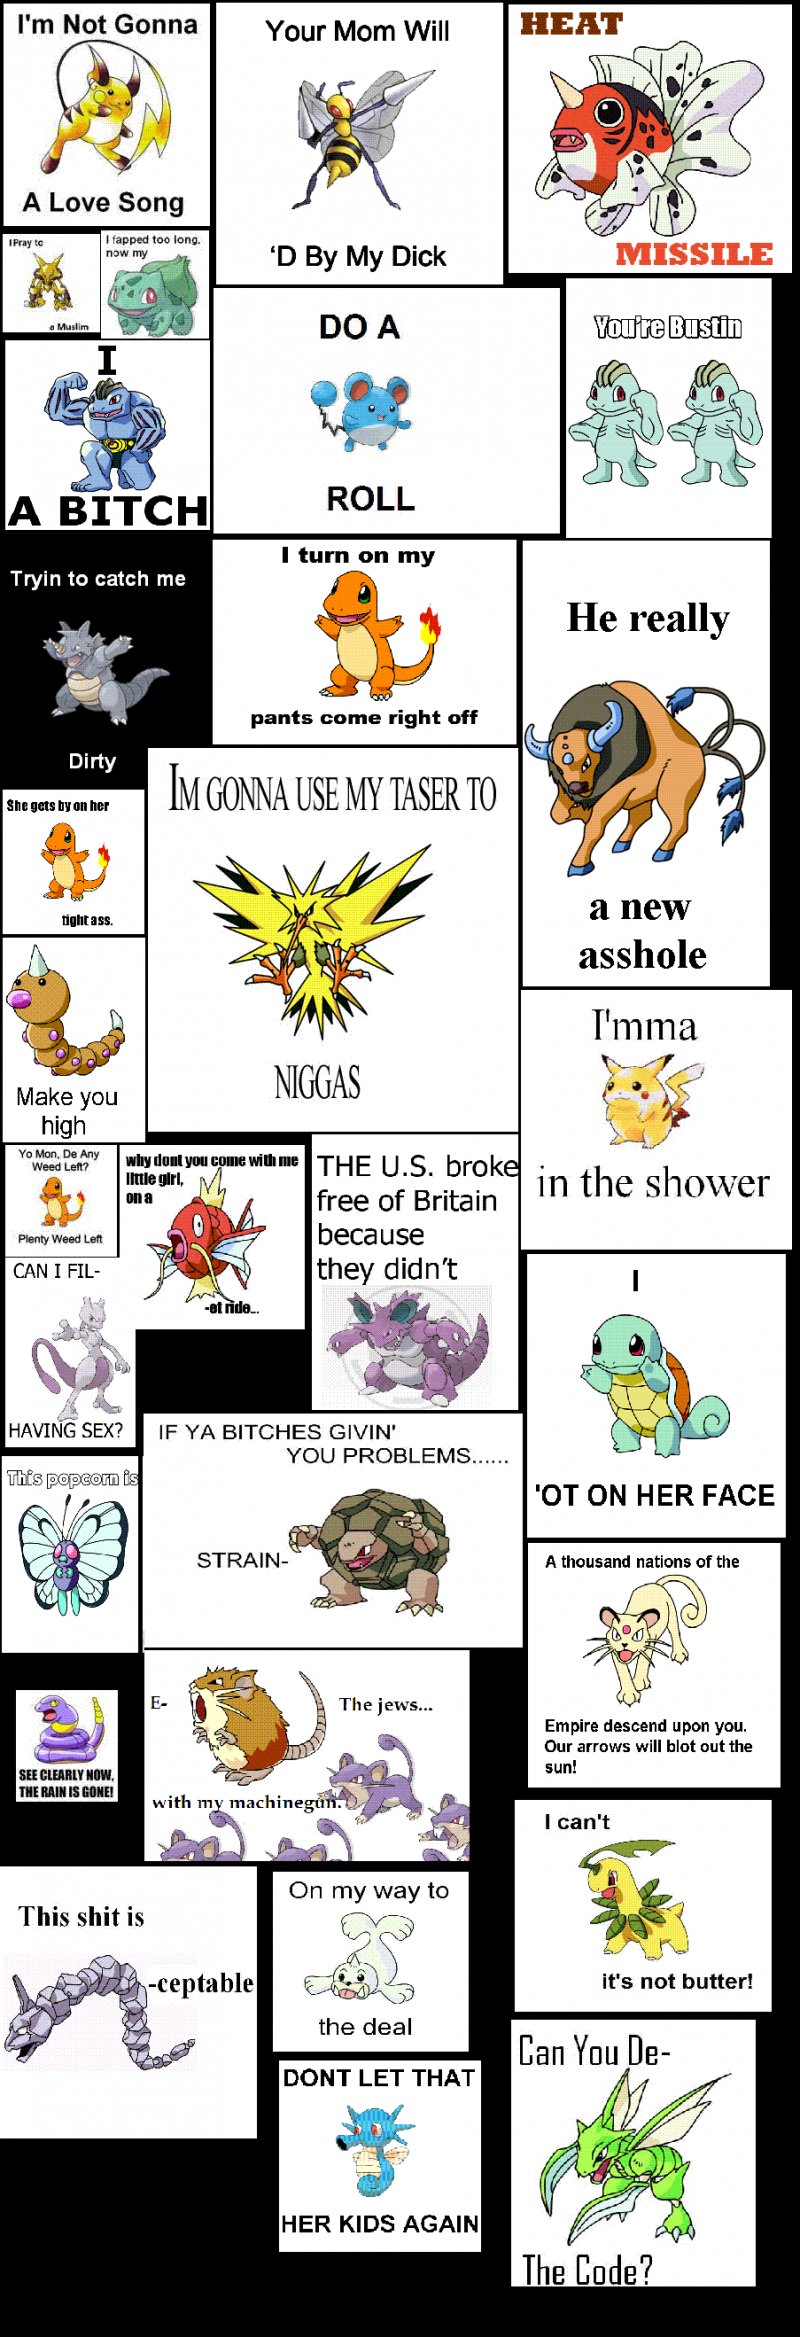 random pic pokemon messages - I'm Not Gonna Your Mom Will Heat A Love Song 211 V I Pray to I fapped too long. now my 'D By My Dick Missile a Muslim Do A You're Bustin Na A Bitch Roll I turn on my Tryin to catch me He really pants come right off Dirty Im G